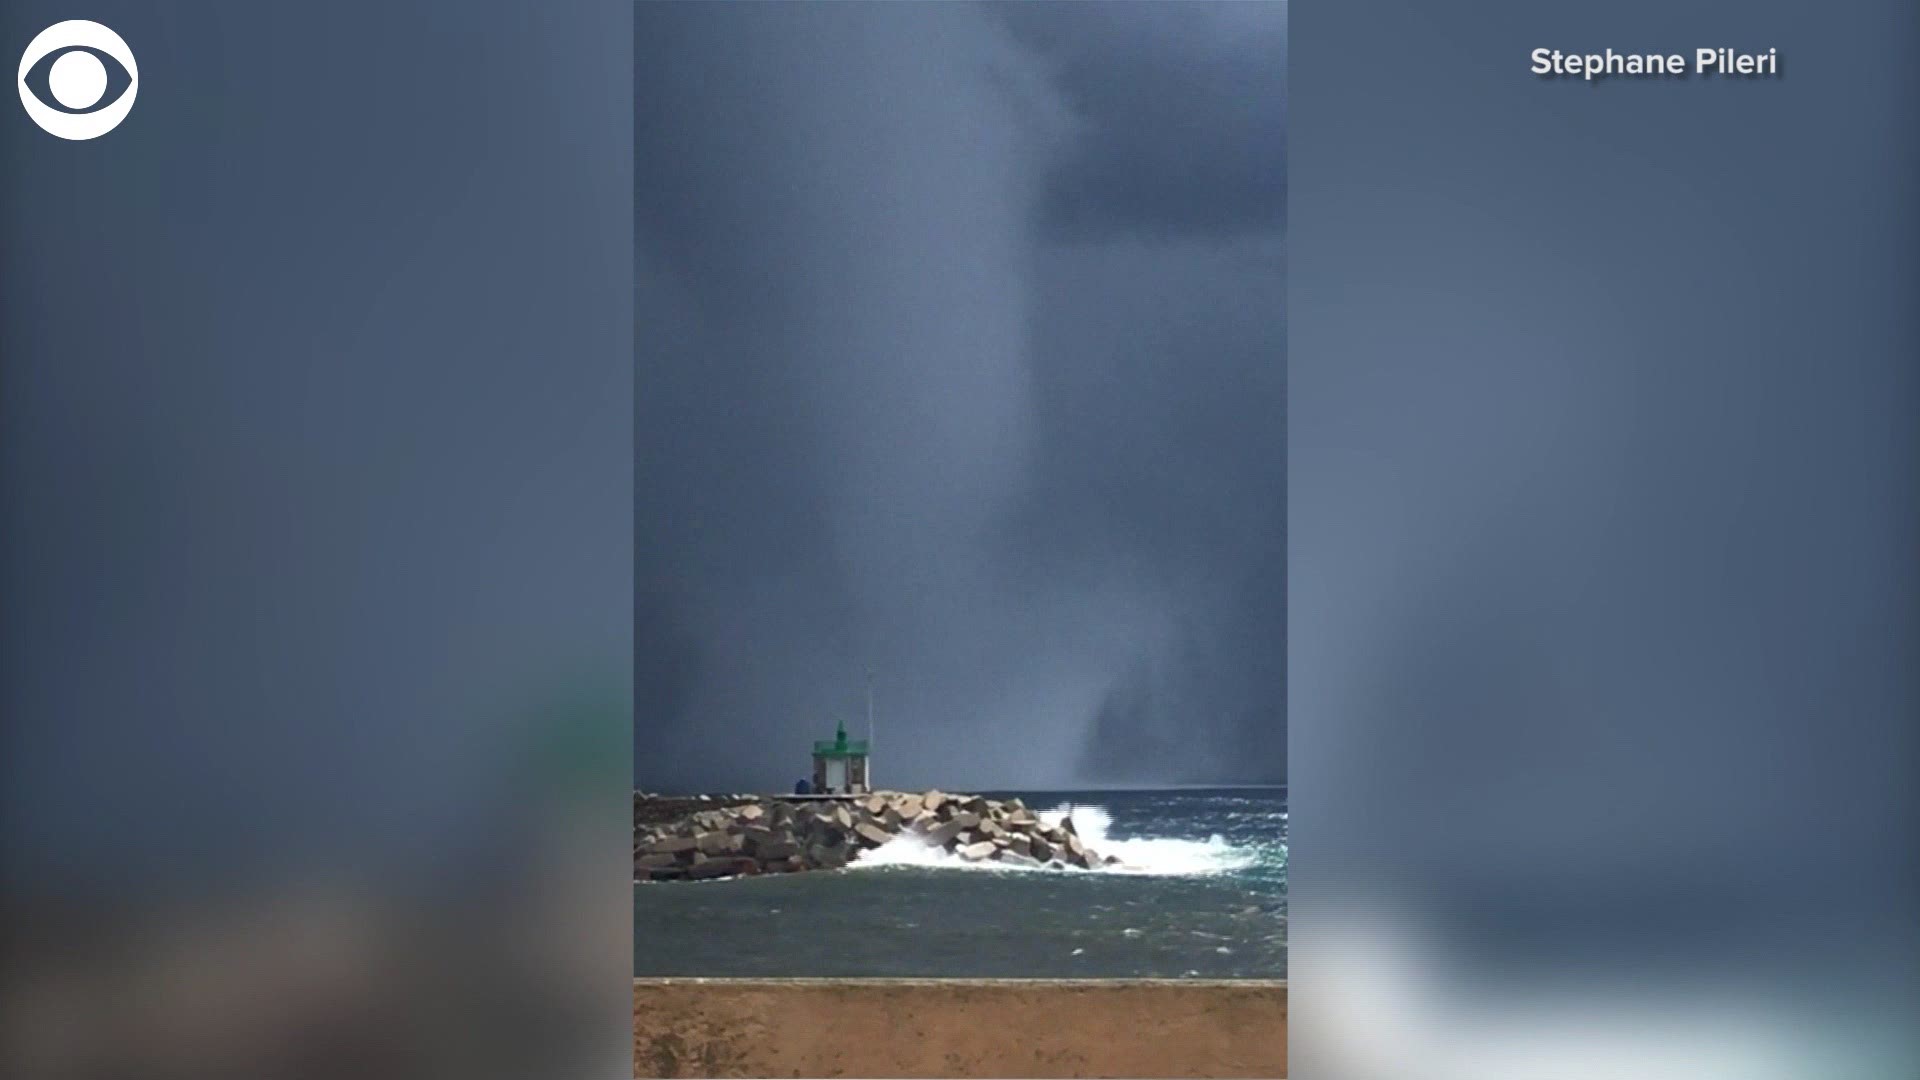 This gigantic waterspout formed off the coast of Corsica, an island in the Mediterranean Sea, on Monday. Stephane Pileri captured the waterspout on camera.